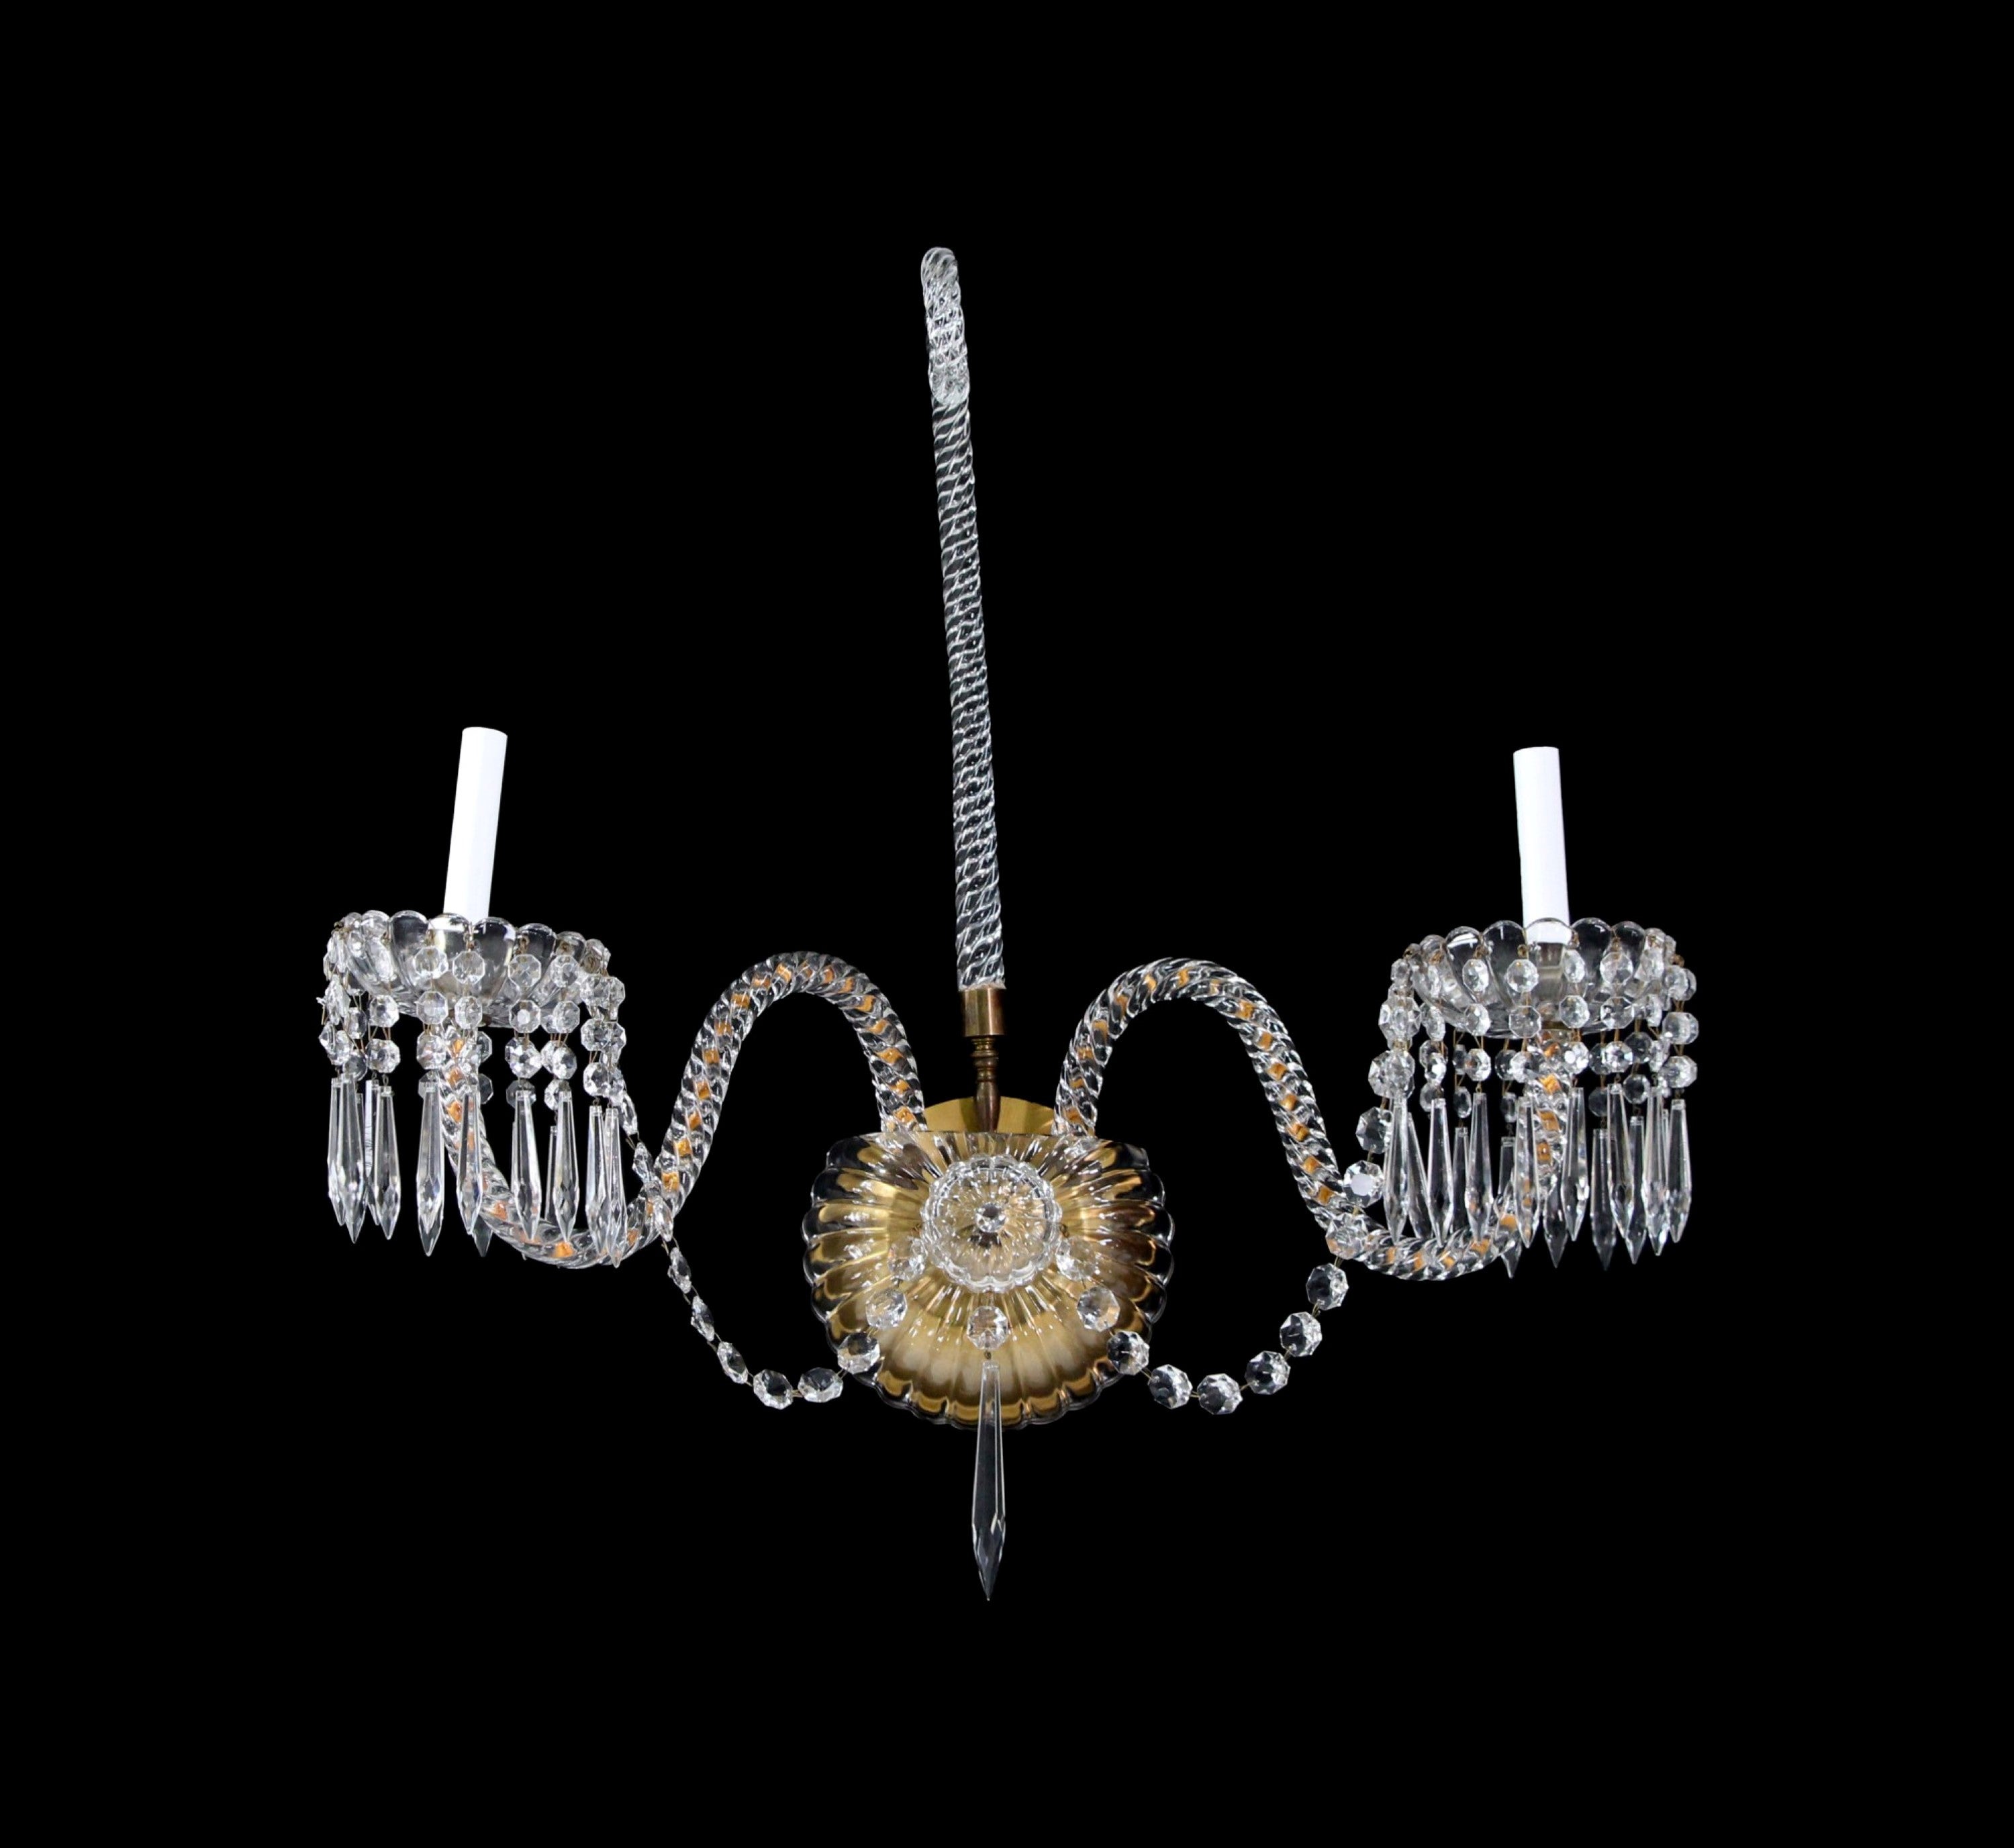 Crystal Sconce Hotel Pennsylvania, NYC Quantity Available